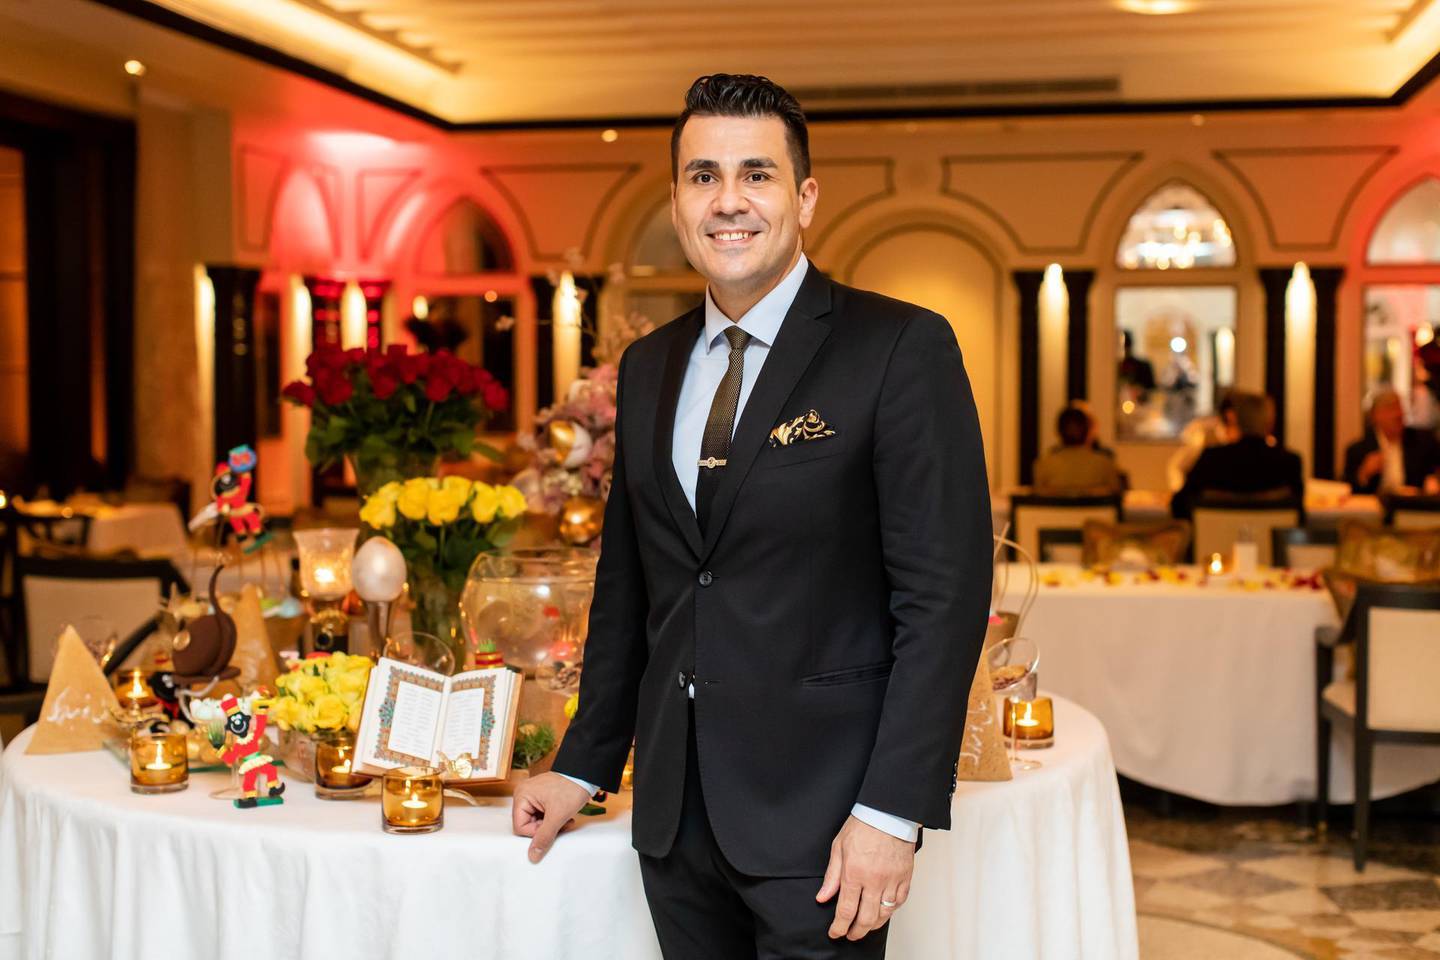 Mansour Memarian, the hotel manager at the Palazzo Versace Dubai said his staff were prepped to check vaccination certificates. Courtesy, Palazzo Versace